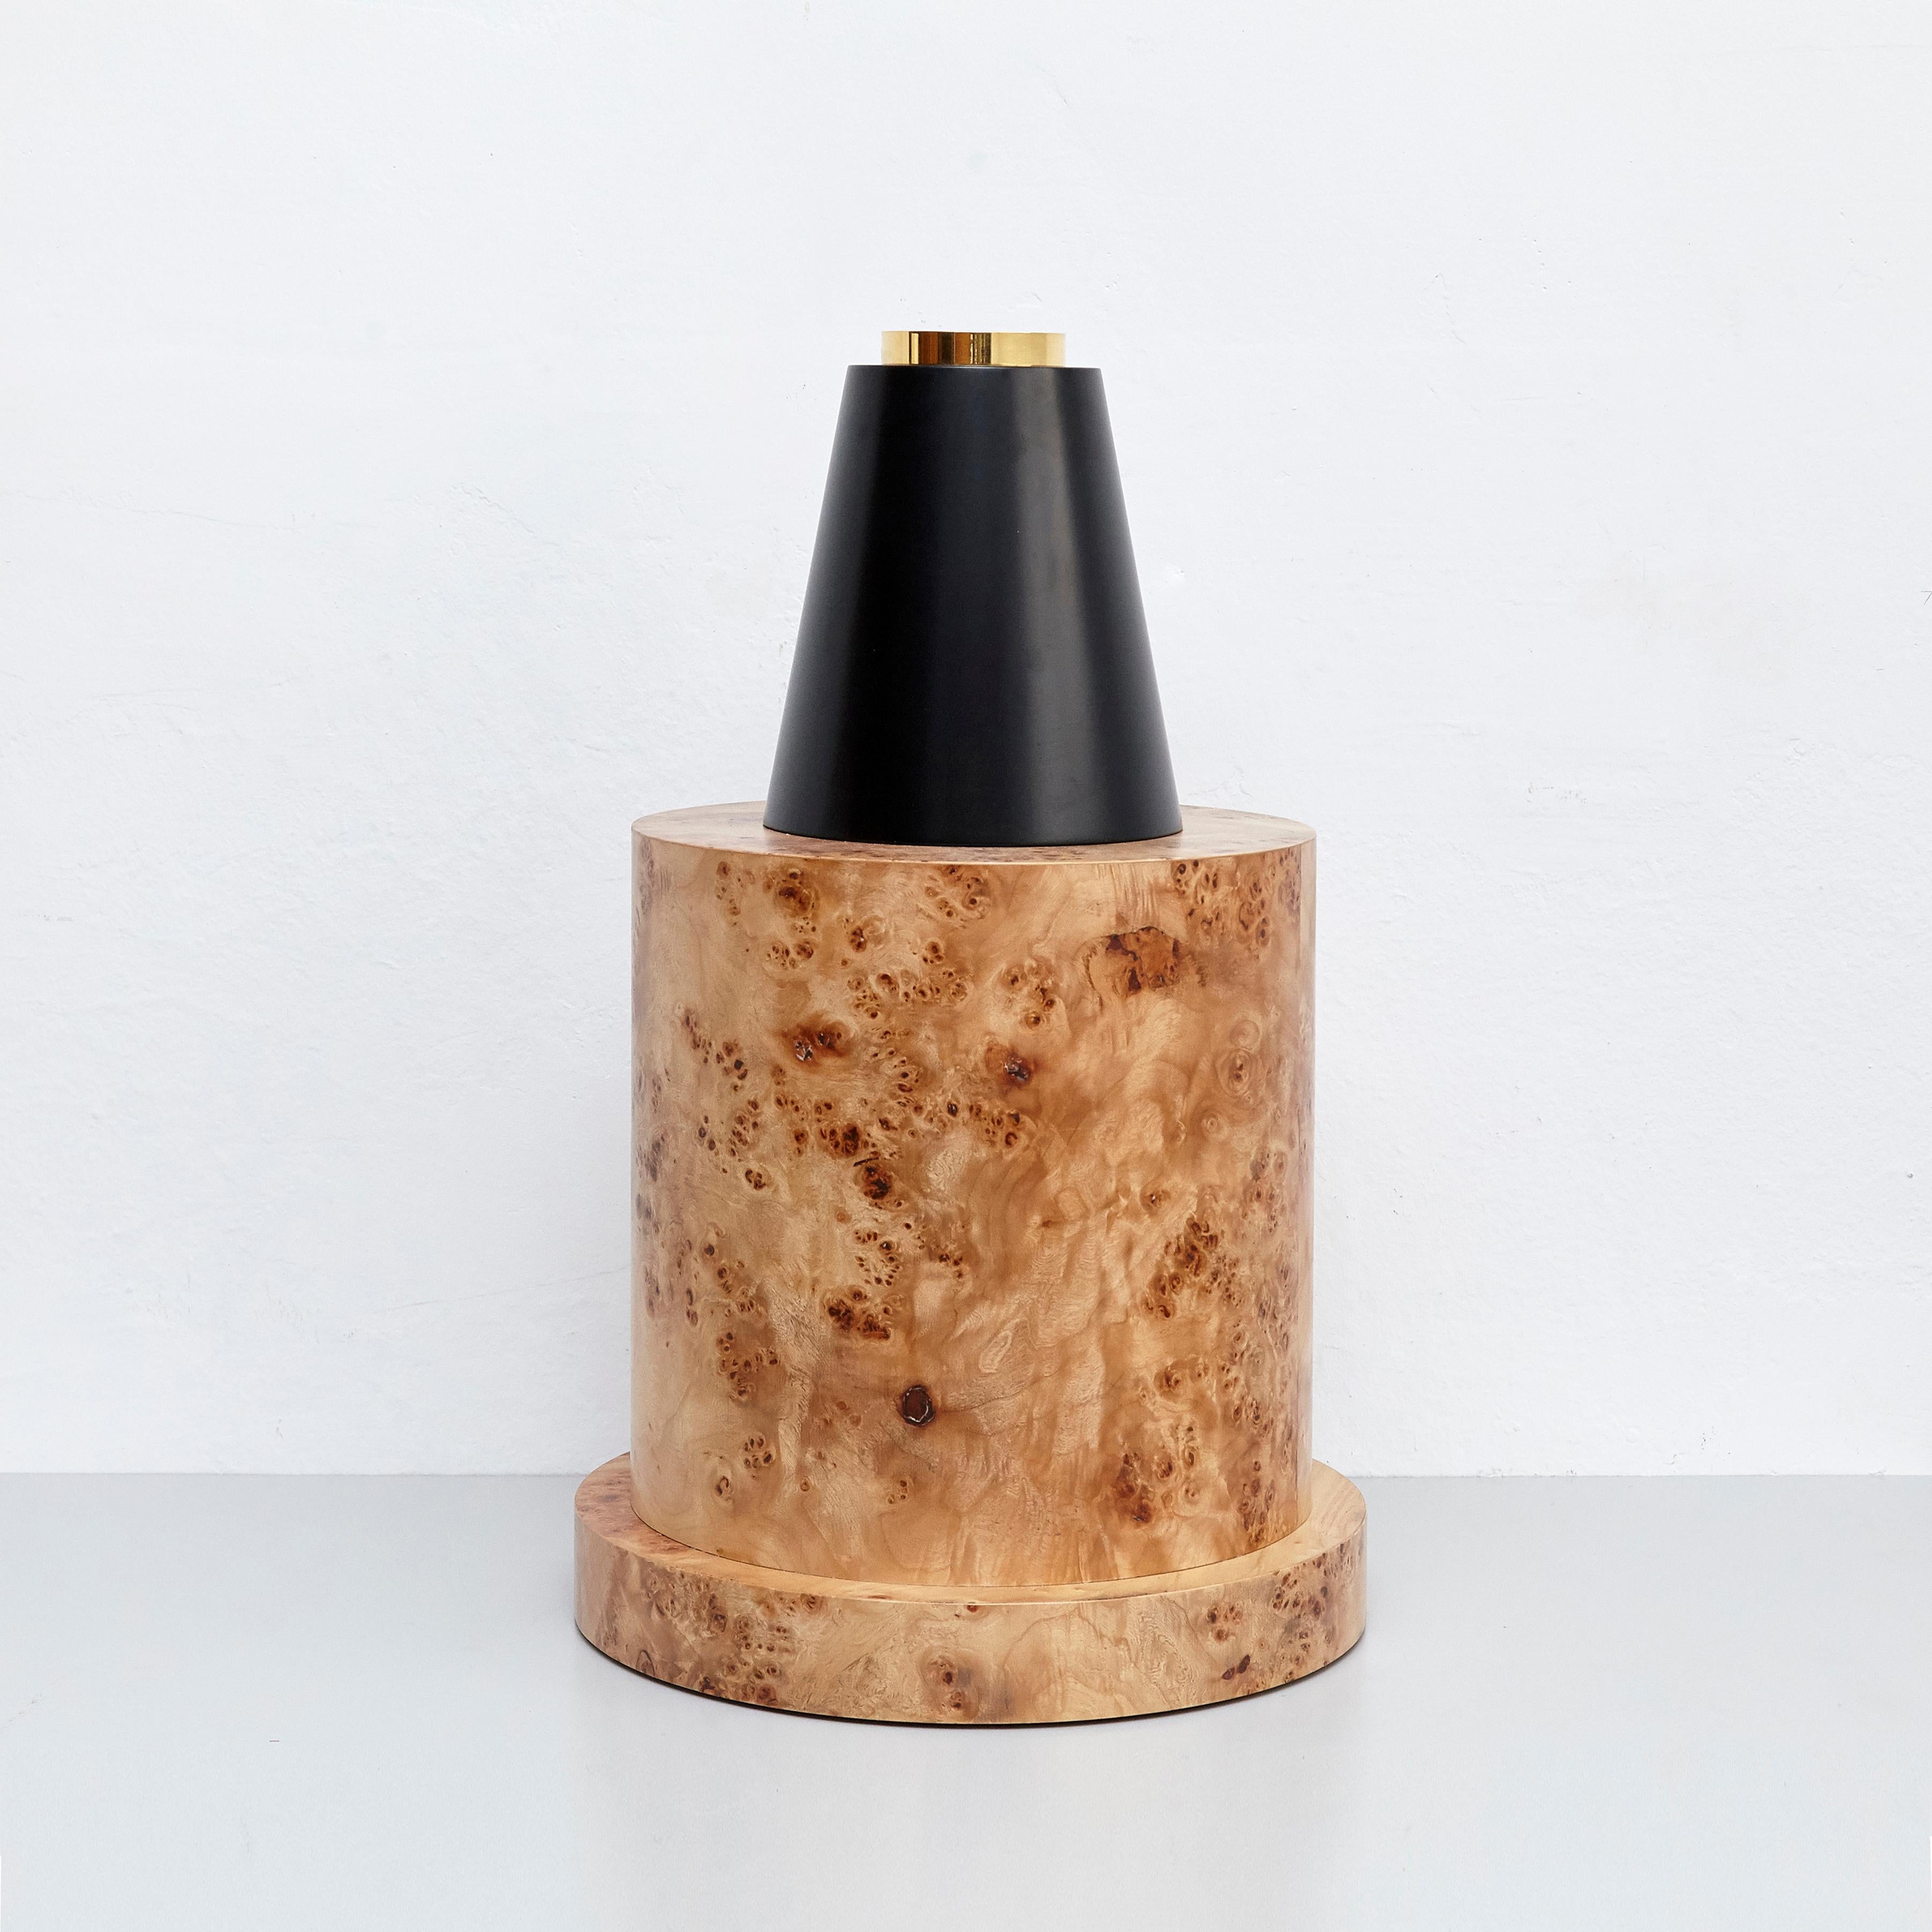 I vase made for the collection of twenty-seven woods for Chinese artificial flowers vase by Ettore Sottsass,
Edited by Design Gallery Milano, 1995.

Limited edition of 12 numbered pieces, number 9 / 12.

In good original condition, with minor